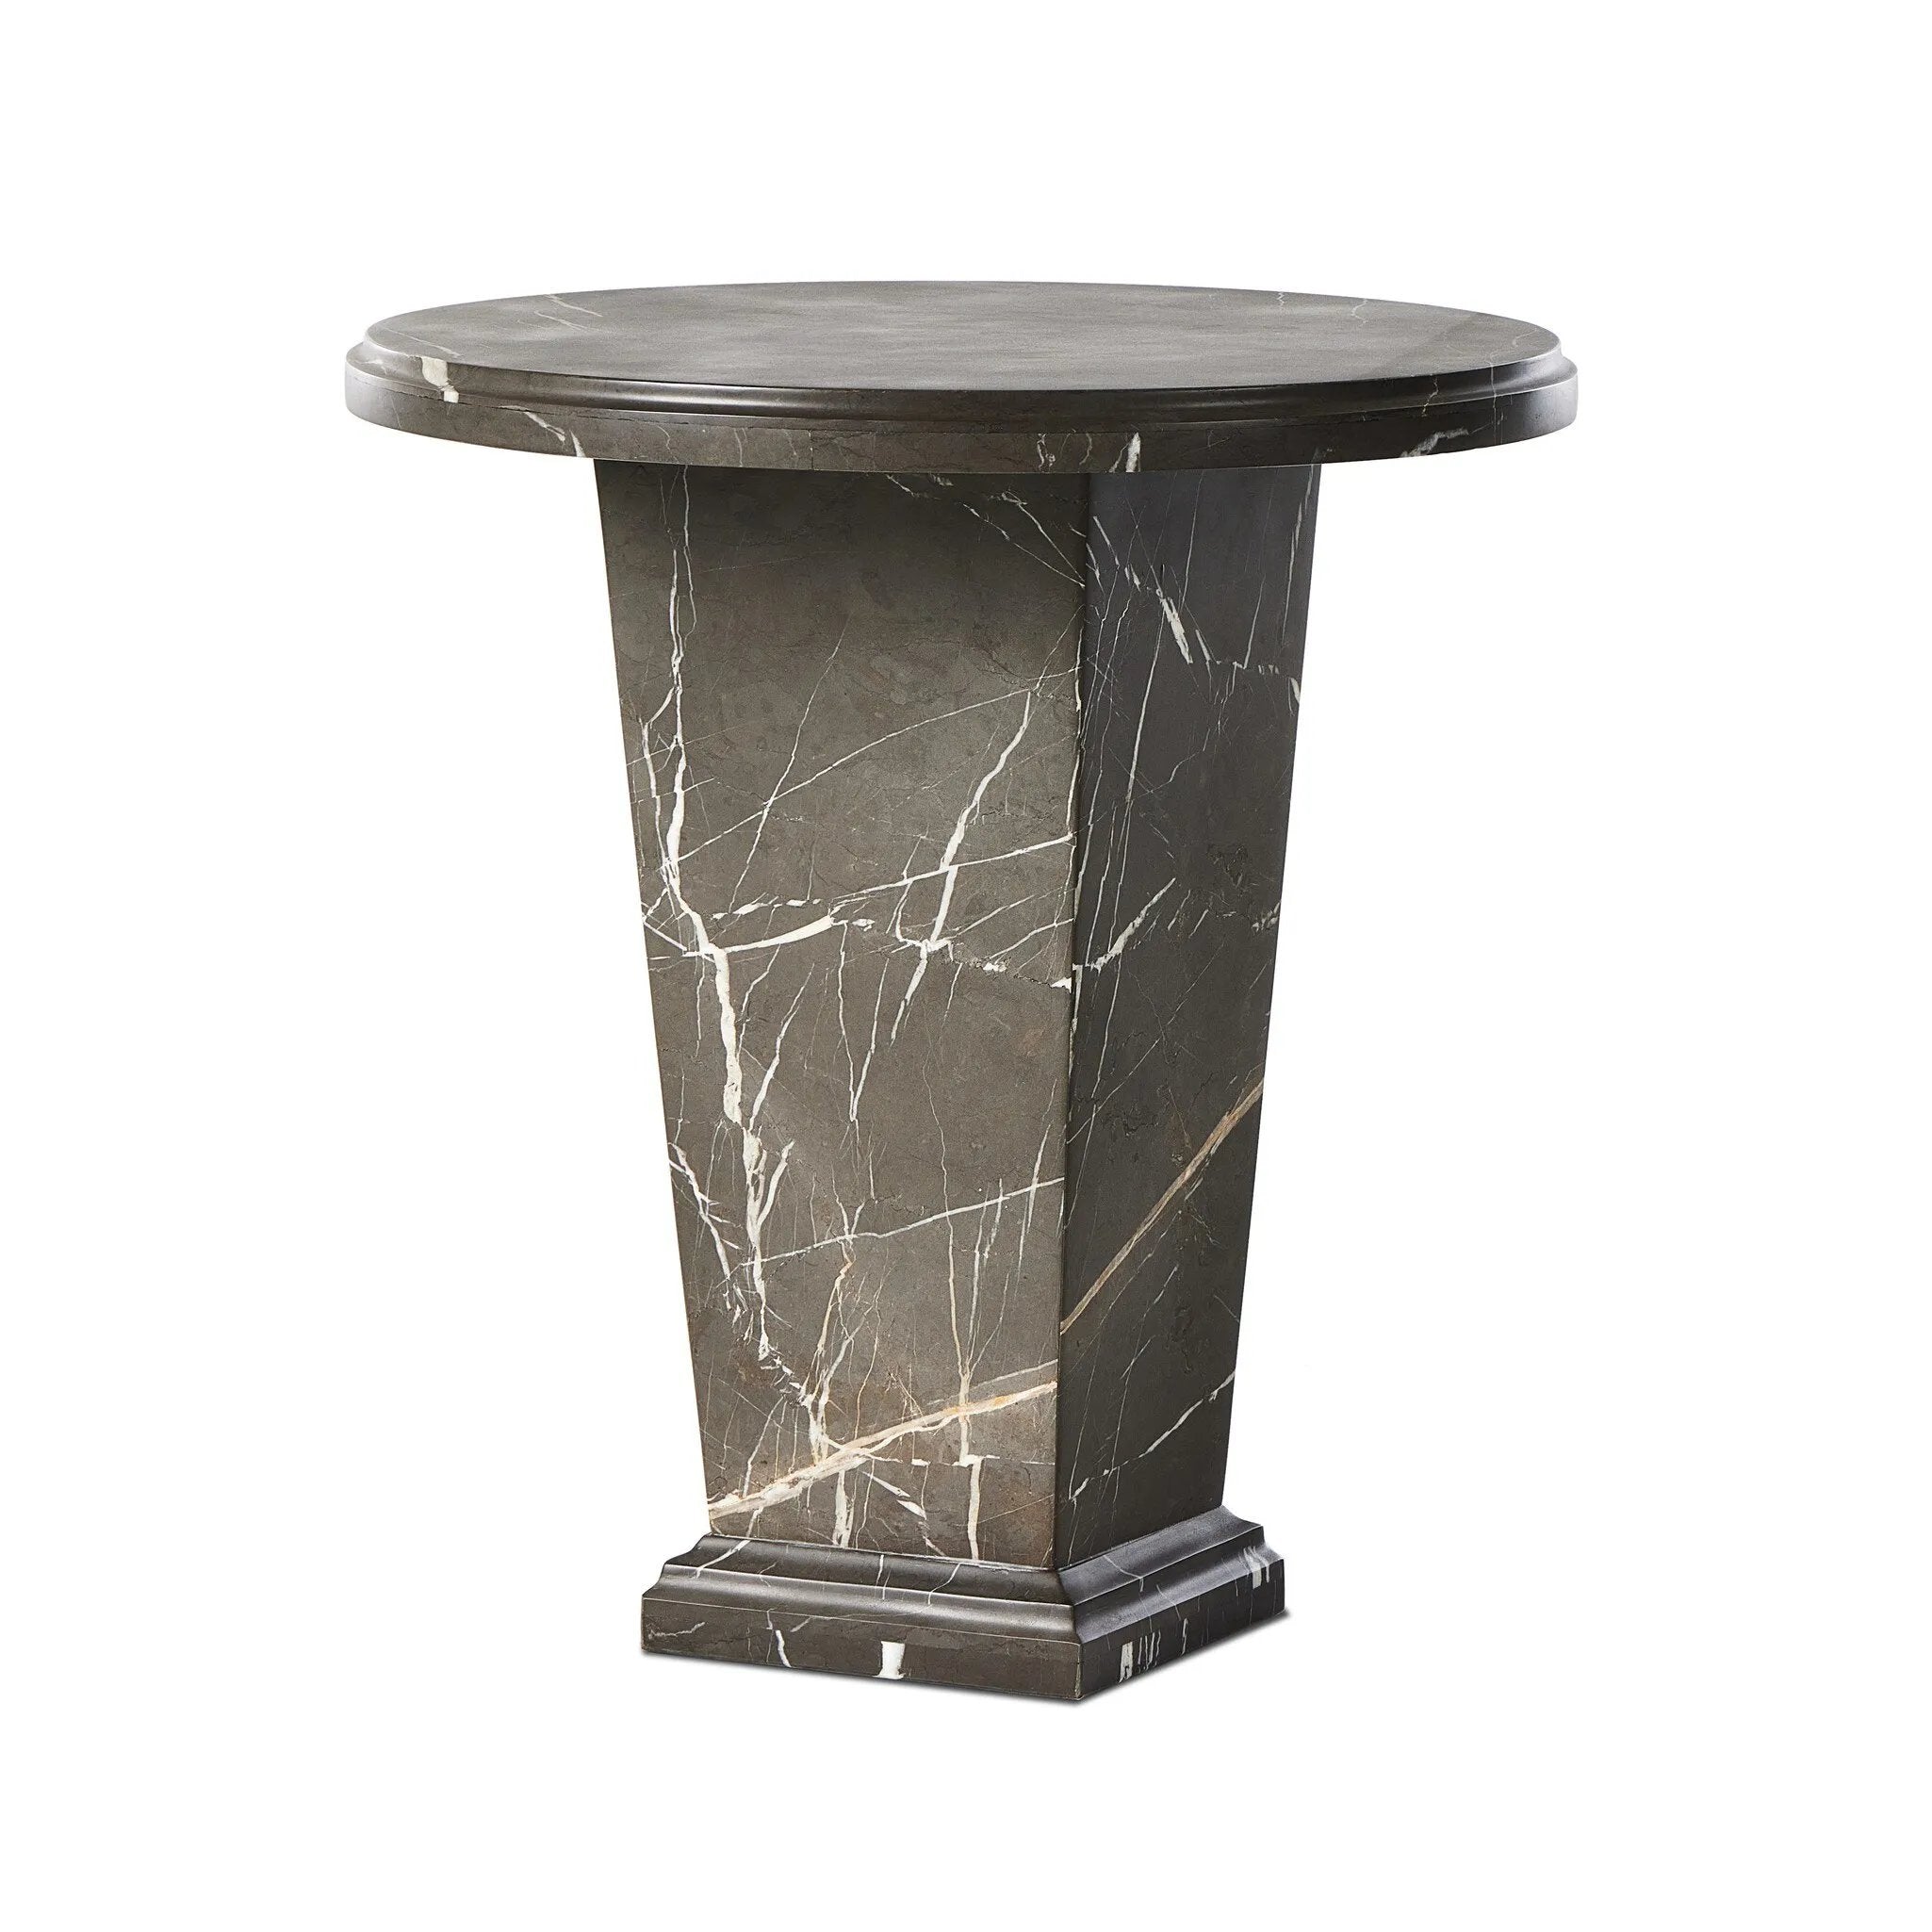 Inspired by Roman columns, a versatile end table of grey Italian marble works a sophisticated touch into any room.Collection: Elemen Amethyst Home provides interior design, new home construction design consulting, vintage area rugs, and lighting in the Houston metro area.